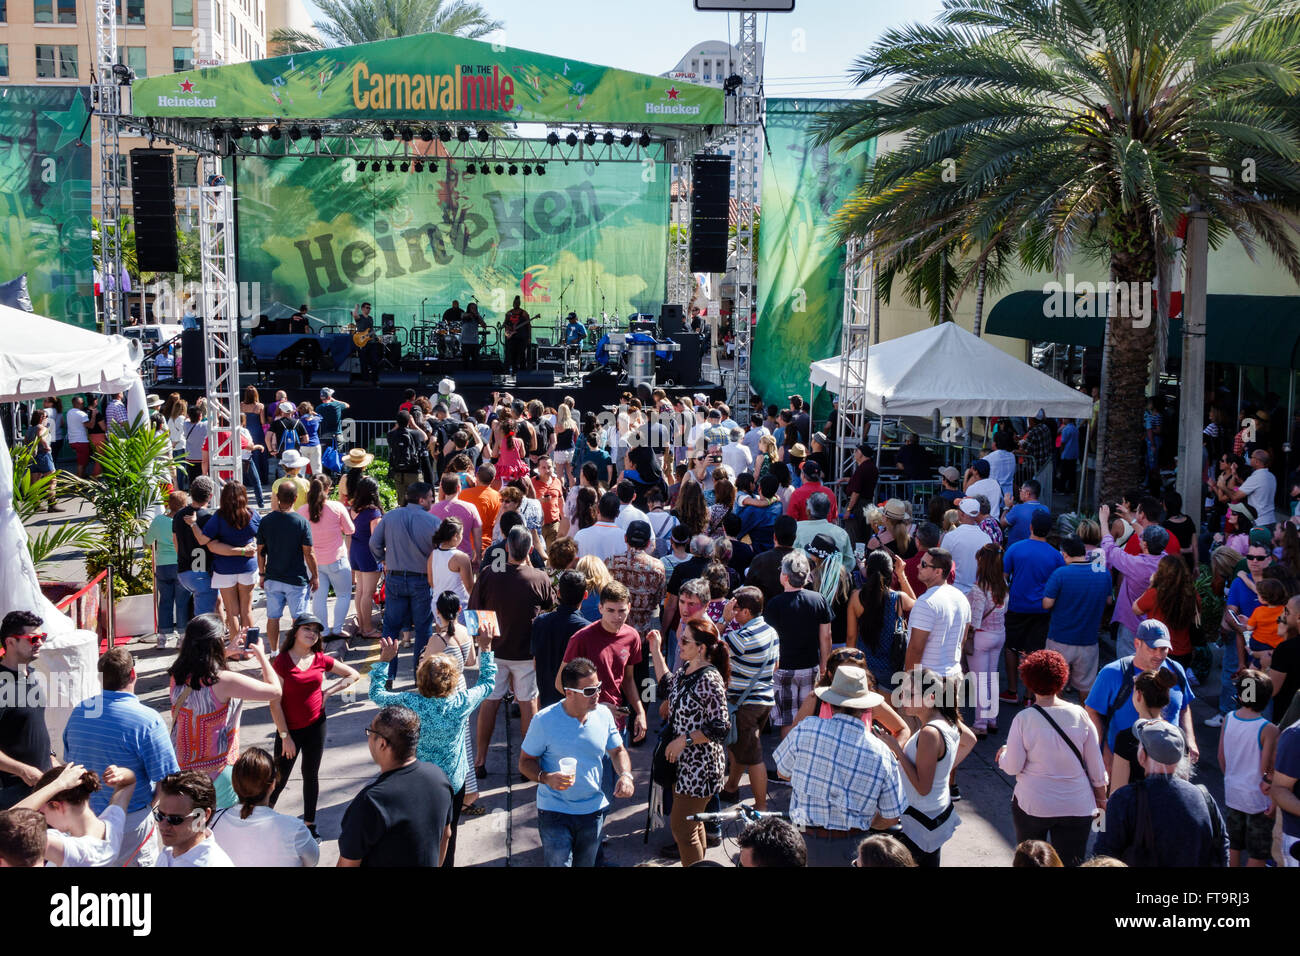 Miami Florida,Coral Gables,Carnaval Carnival Miracle Mile,street festival,annual celebration,Hispanic stage,free live music,crowd,FL160306041 Stock Photo